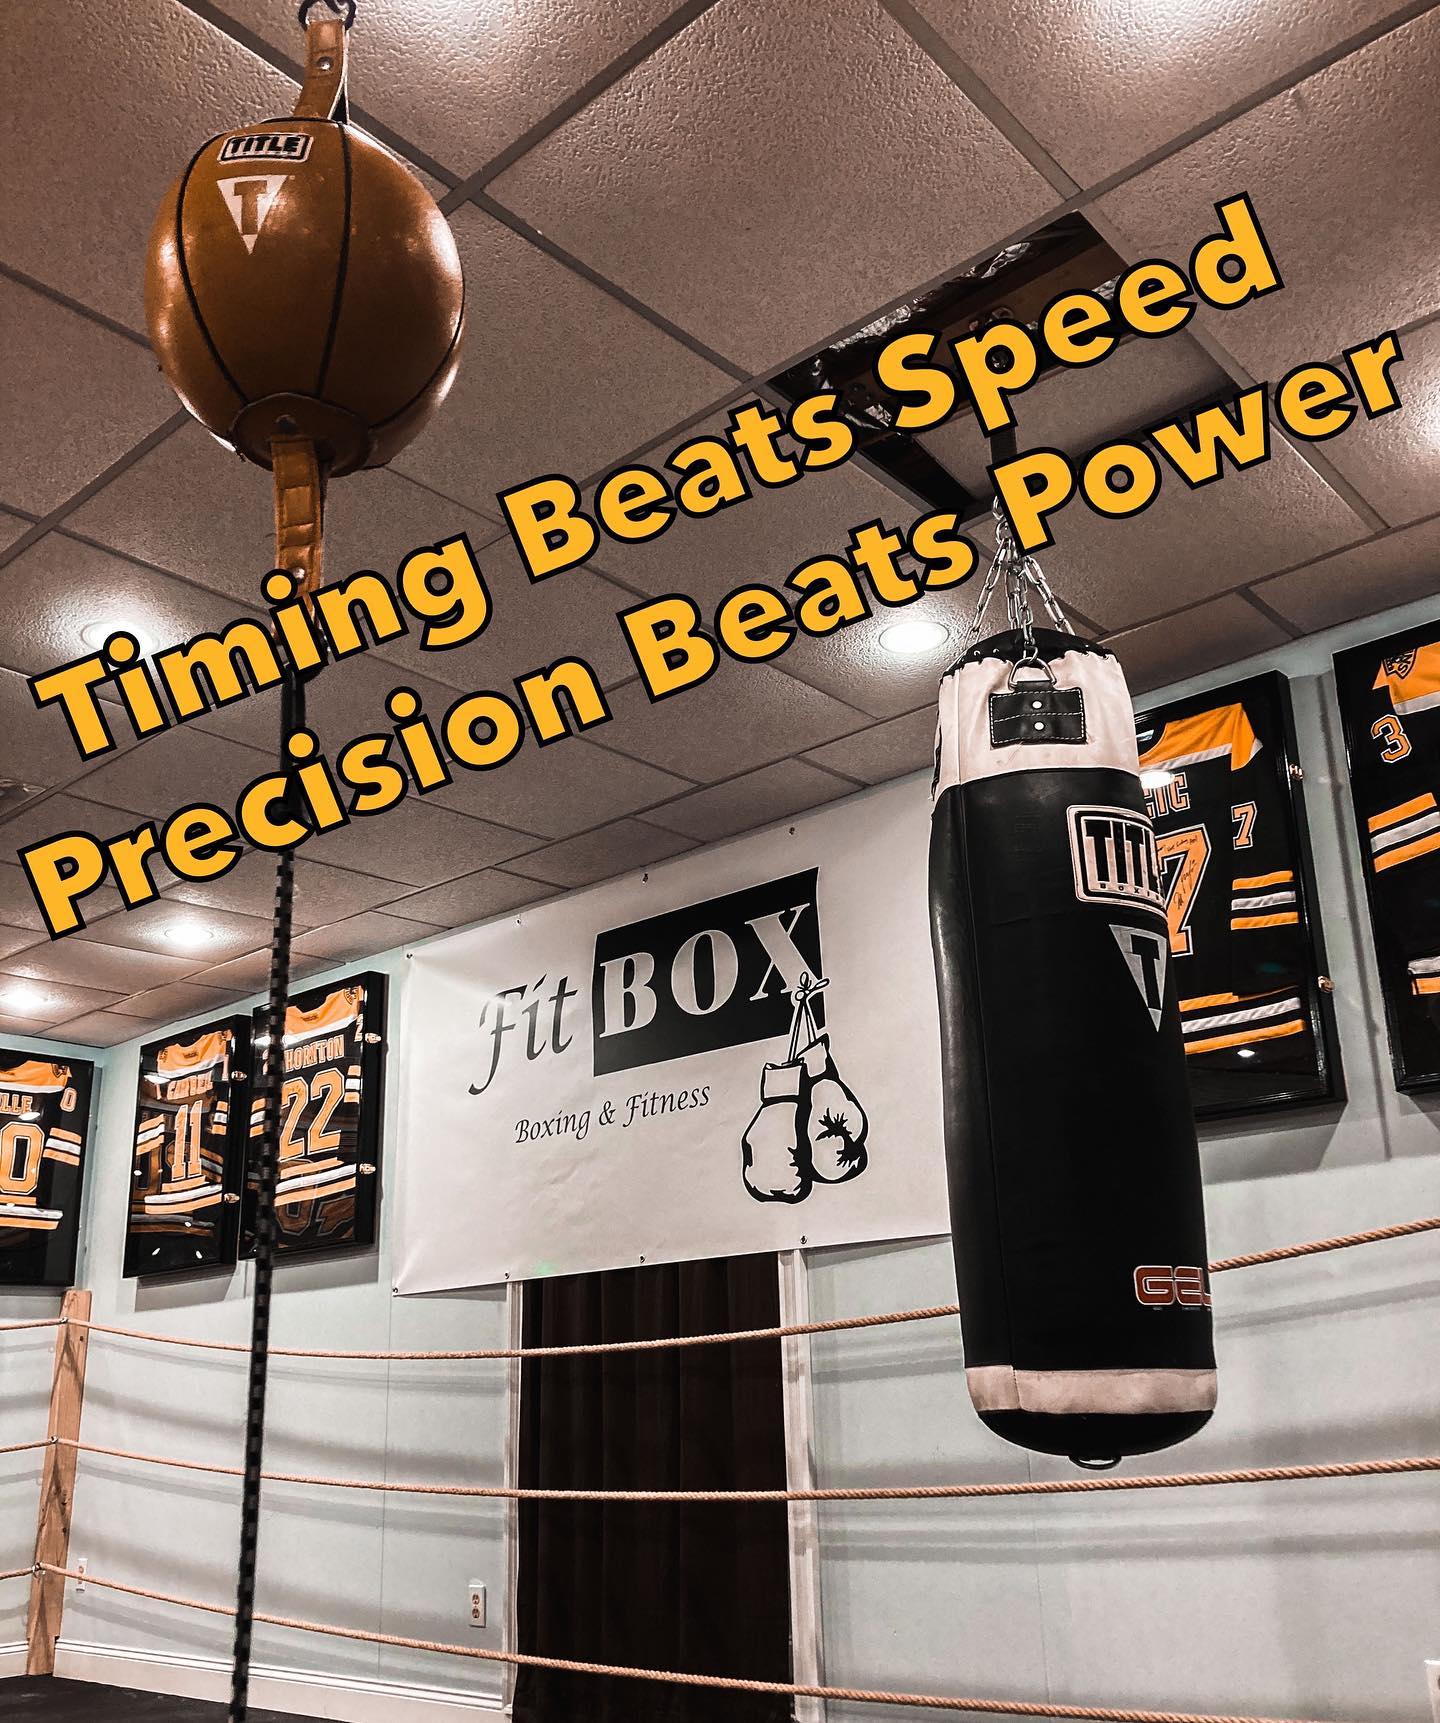 Timing beats Speed
Precision beats Power .
Learning the proper Form & Technique in Boxing will always help you maximize your Boxing workouts . 
Contact us to sign-up for a free boxing workout with Boston’s well-known boxing trainer  @tommymcinerney . Call/text (781)727-9503 or email fitbox@outlook.com .
.